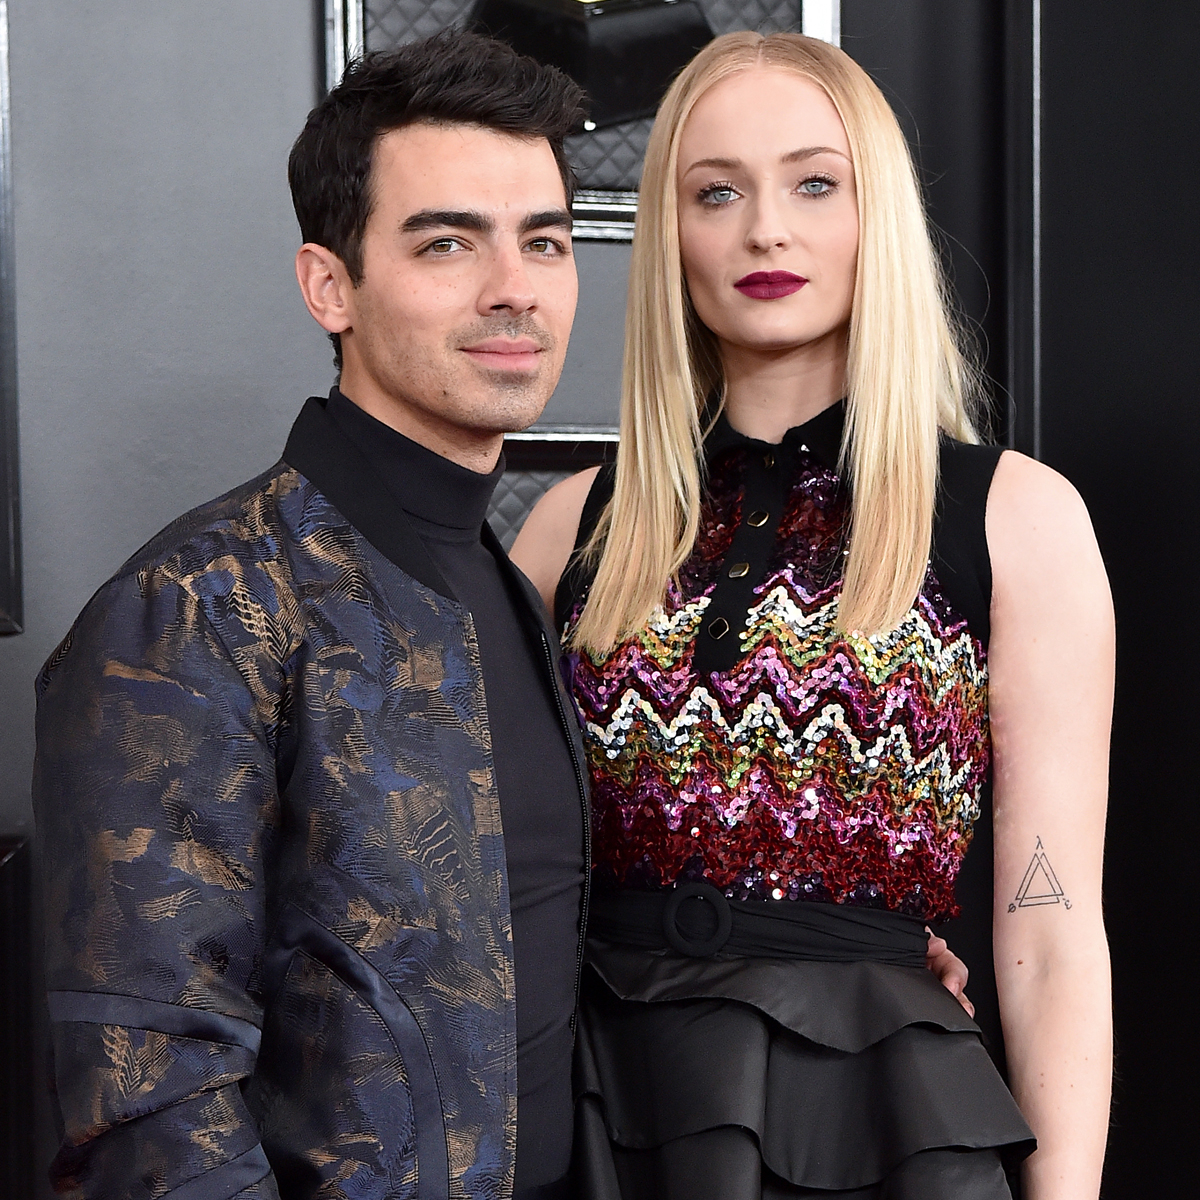 Joe Jonas and Sophie Turner Are Every Bit the Cool Parents We Imagined